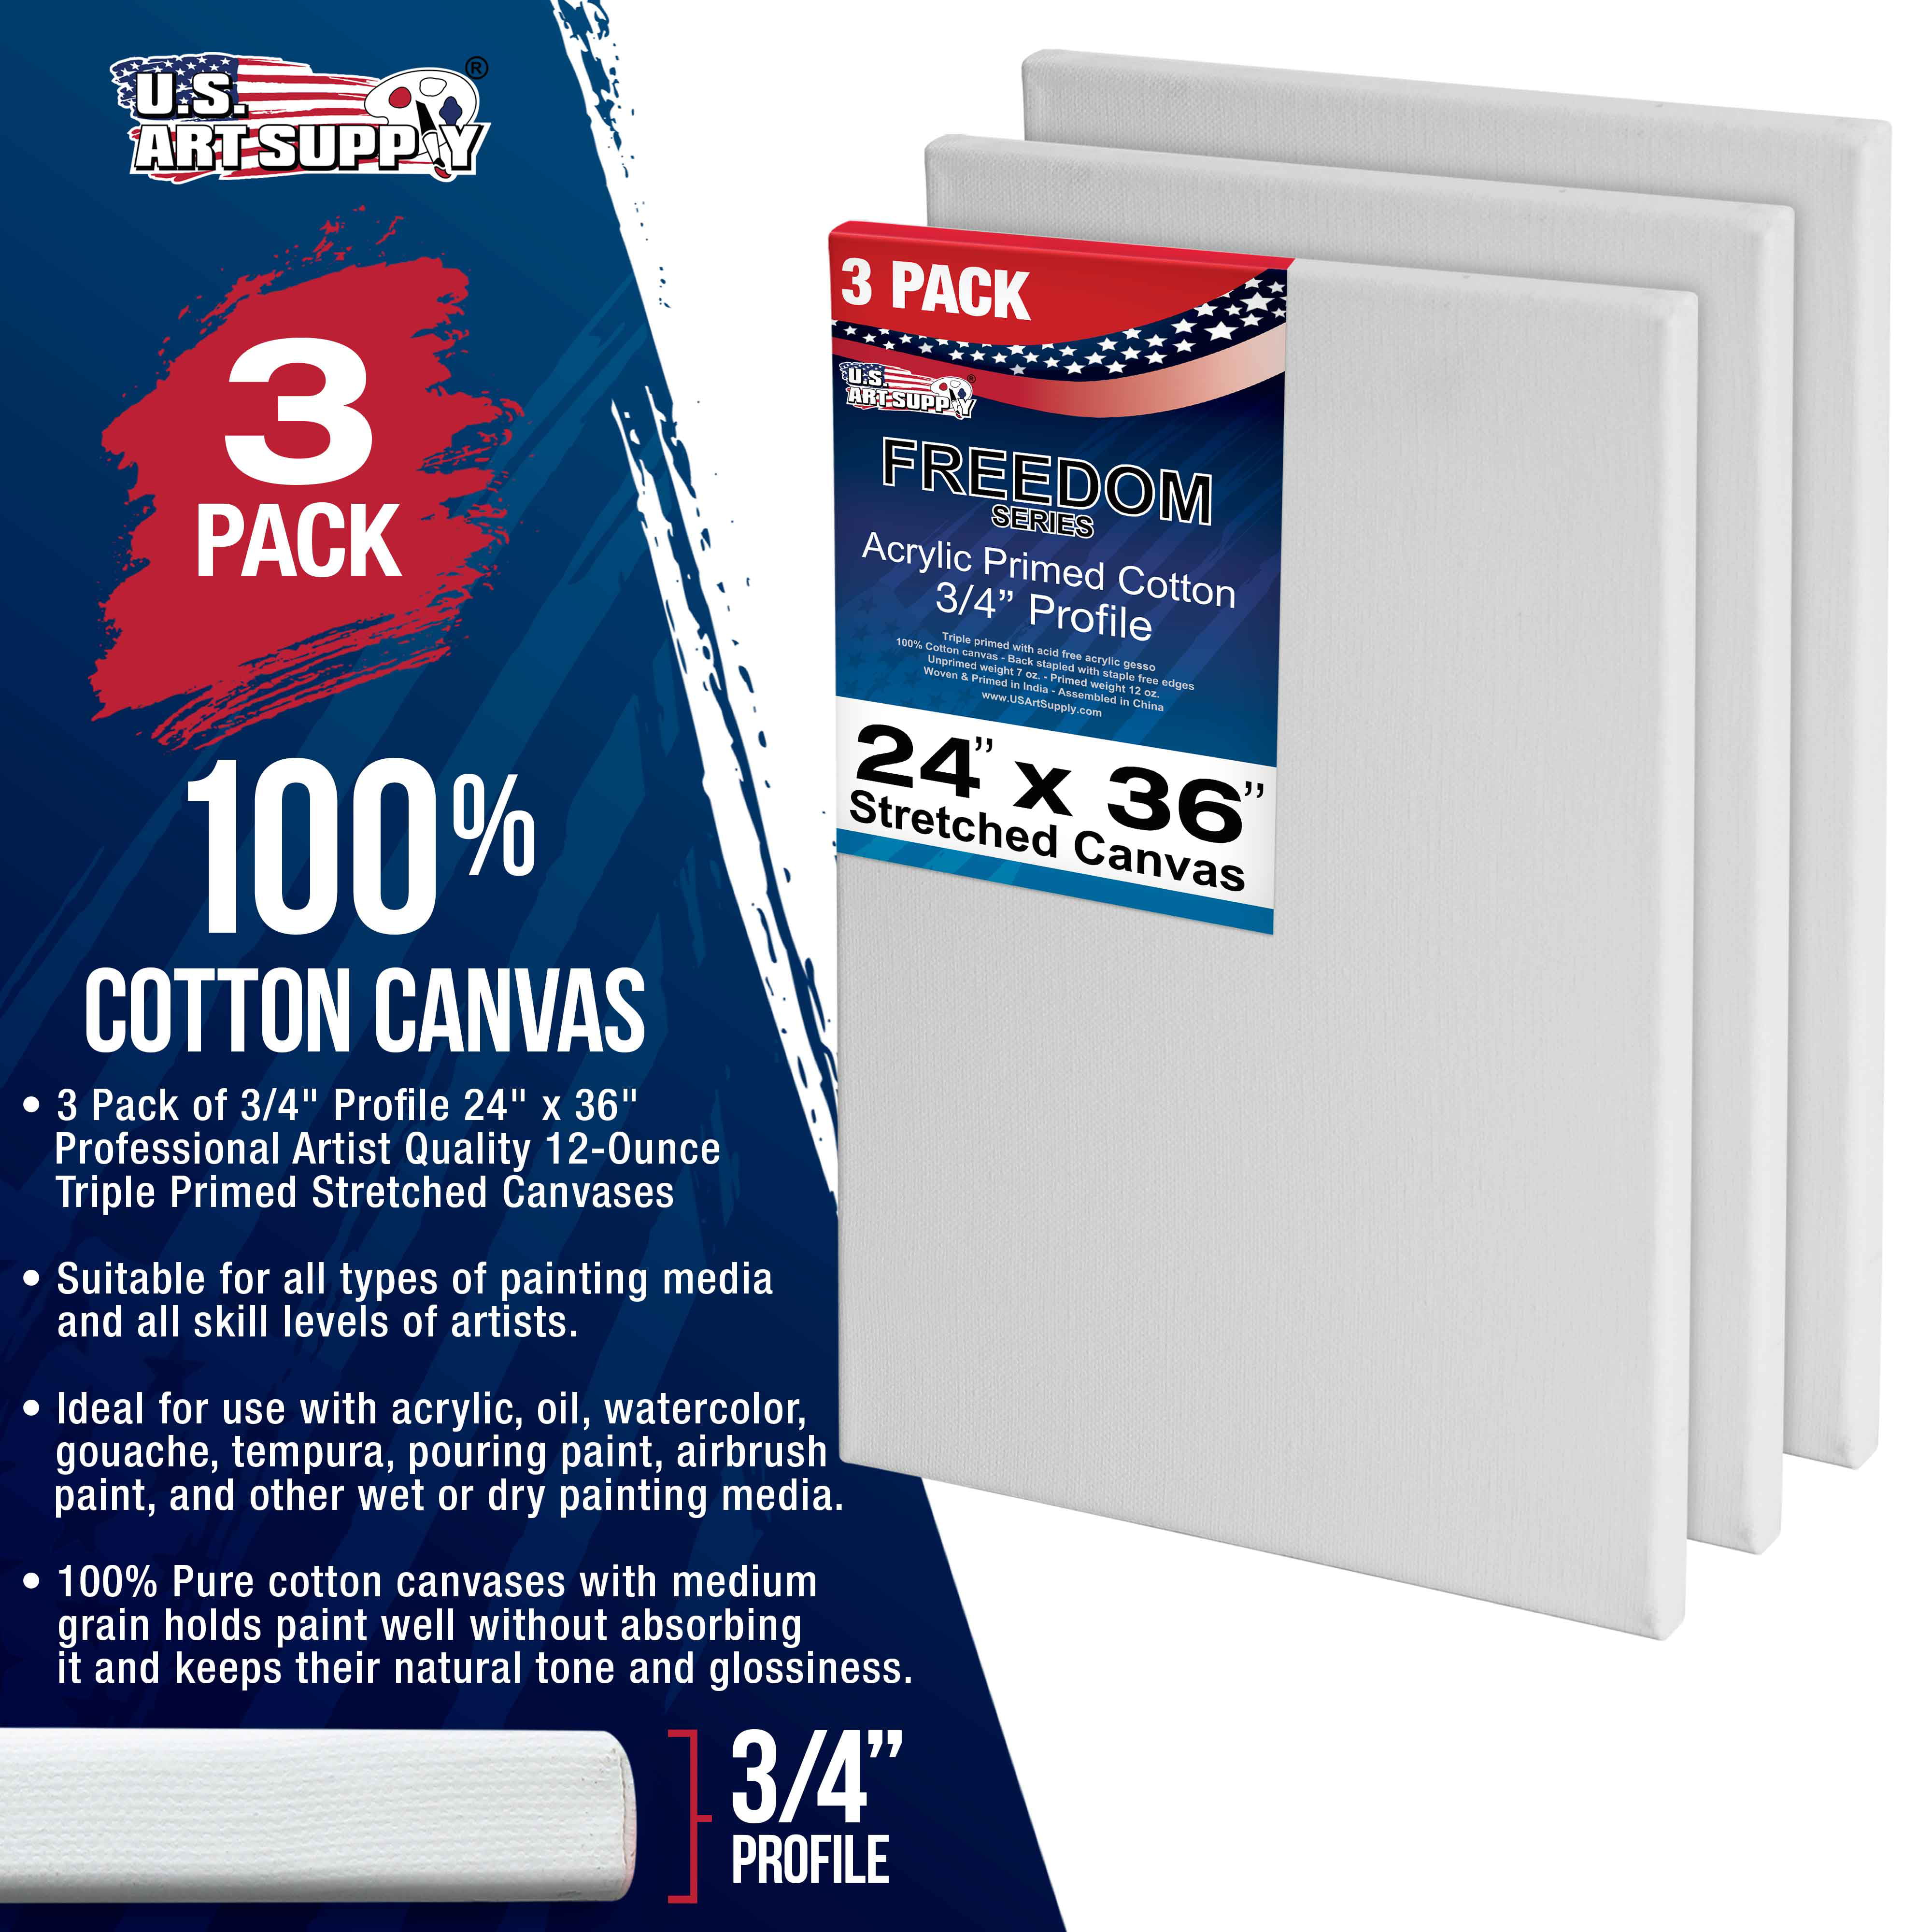  PHOENIX Extra Large Blank Canvas 24X36 Inch - 4 Pack 100%  Cotton 12 oz. Triple Primed Pre Gessoed White Stretched Canvases for  Painting - Ready to Paint Art Paint Canvases for